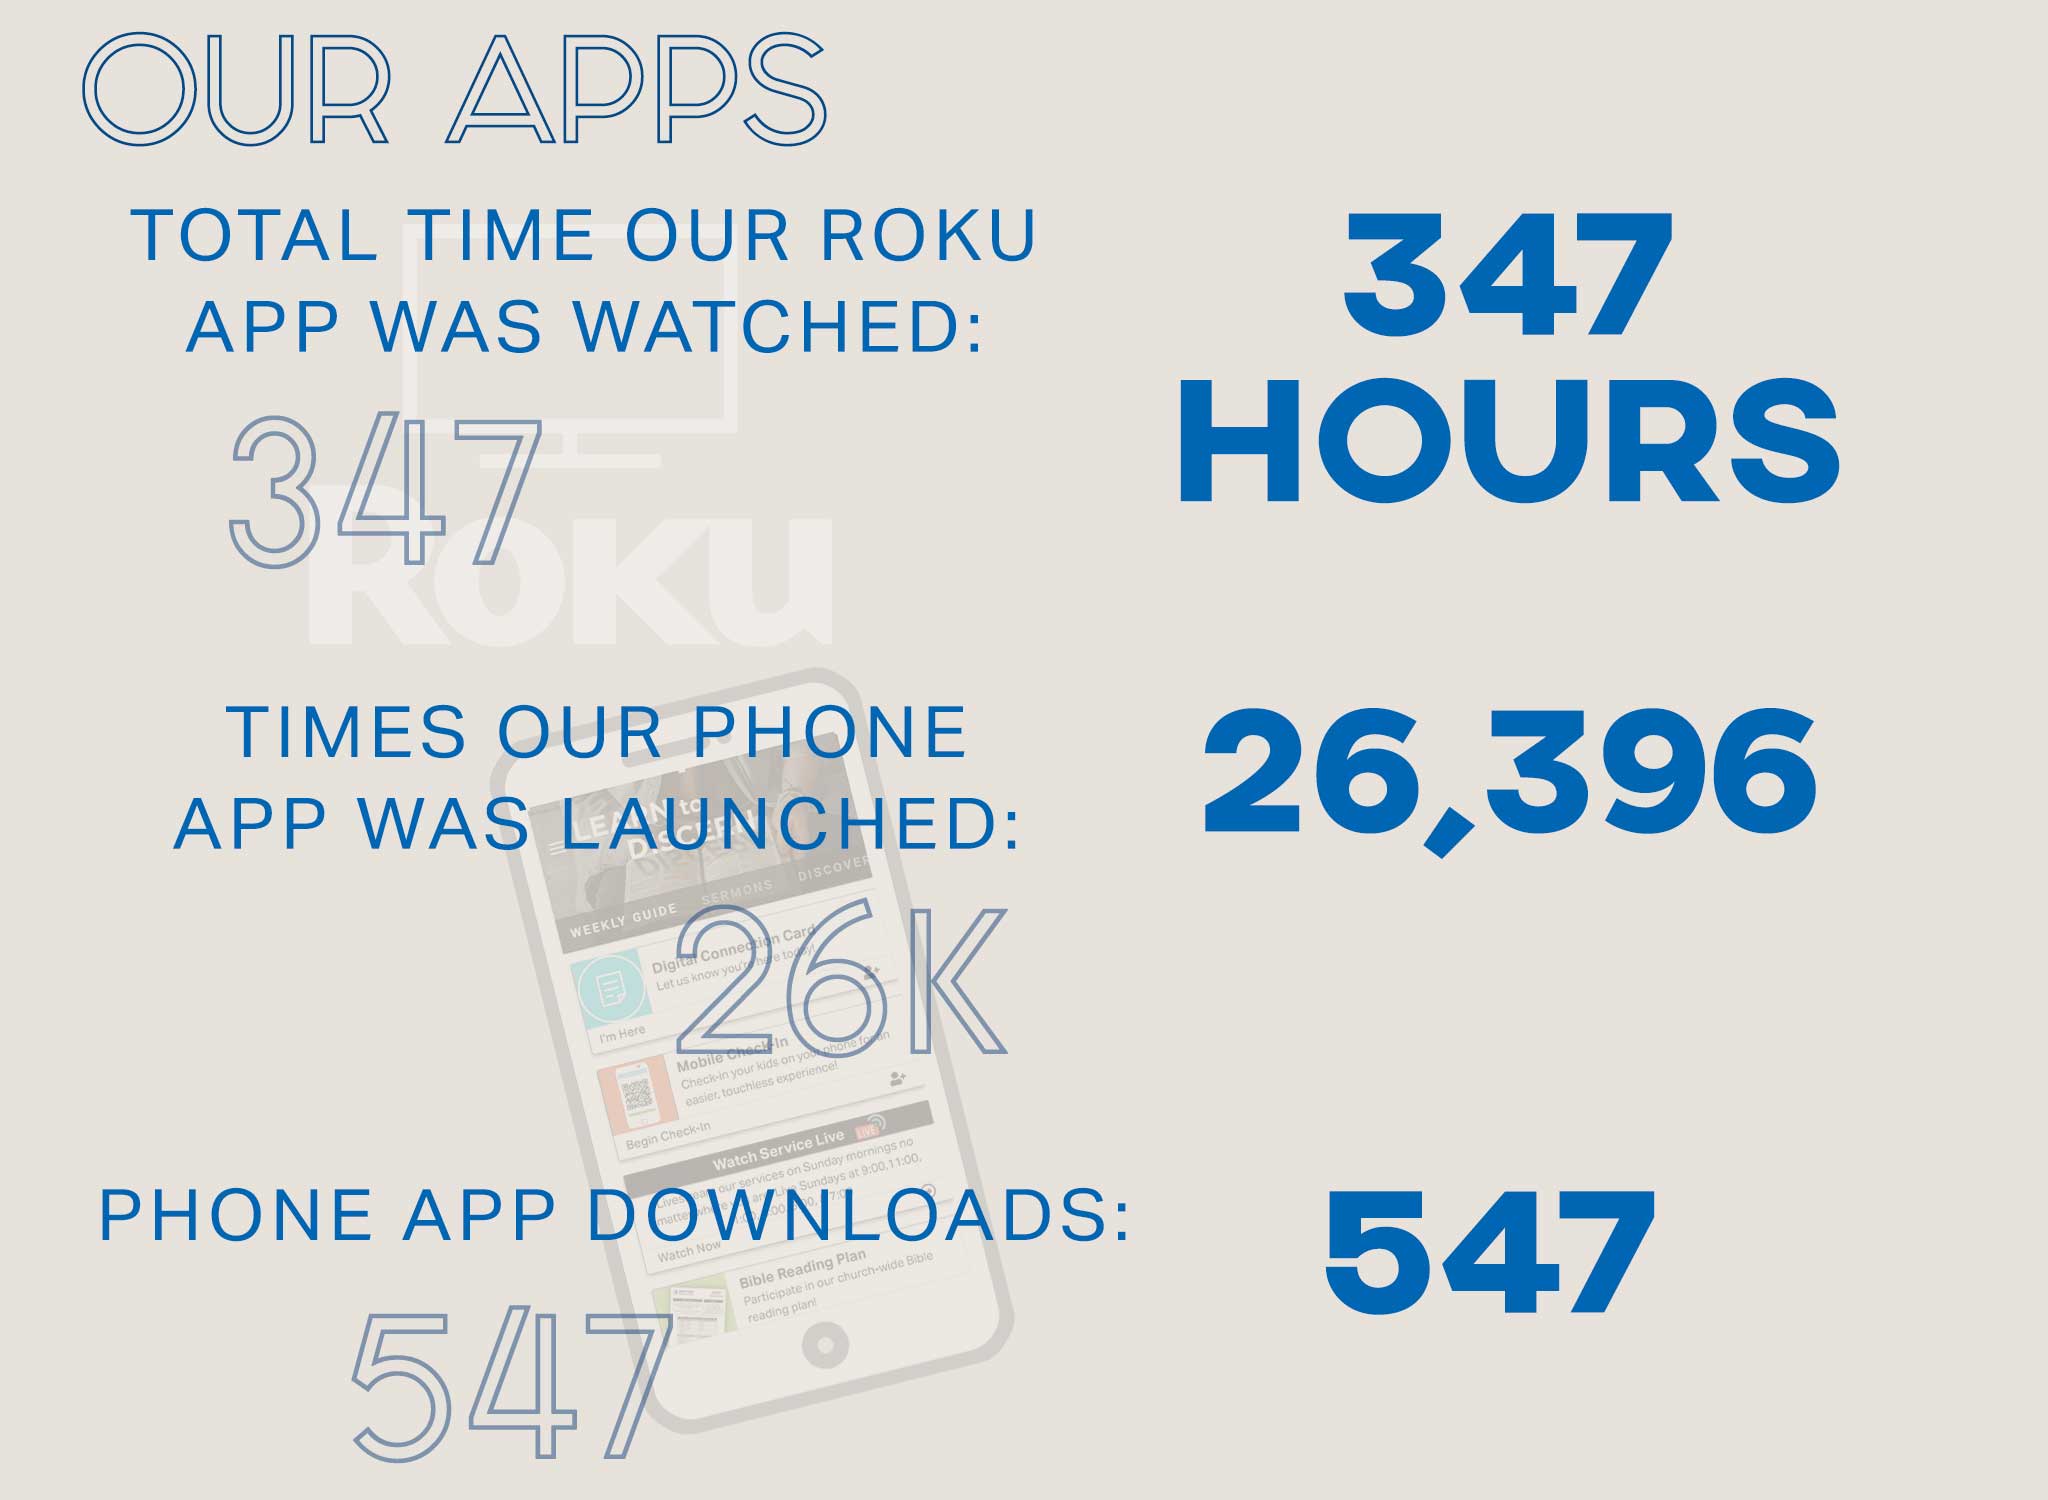 Our mobile app was launched over 26,000 times.